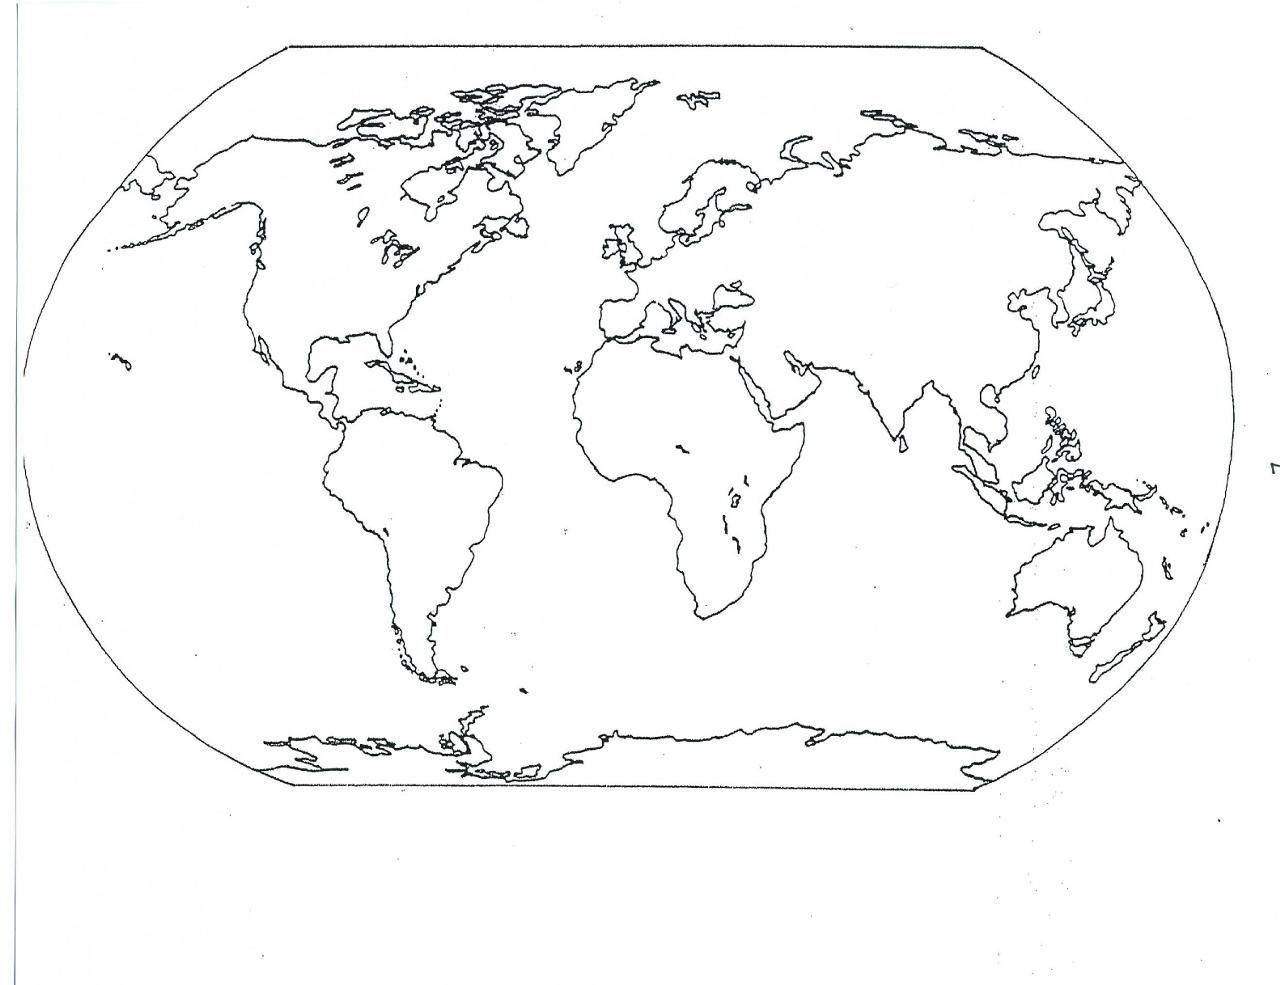 World Map Coloring Page